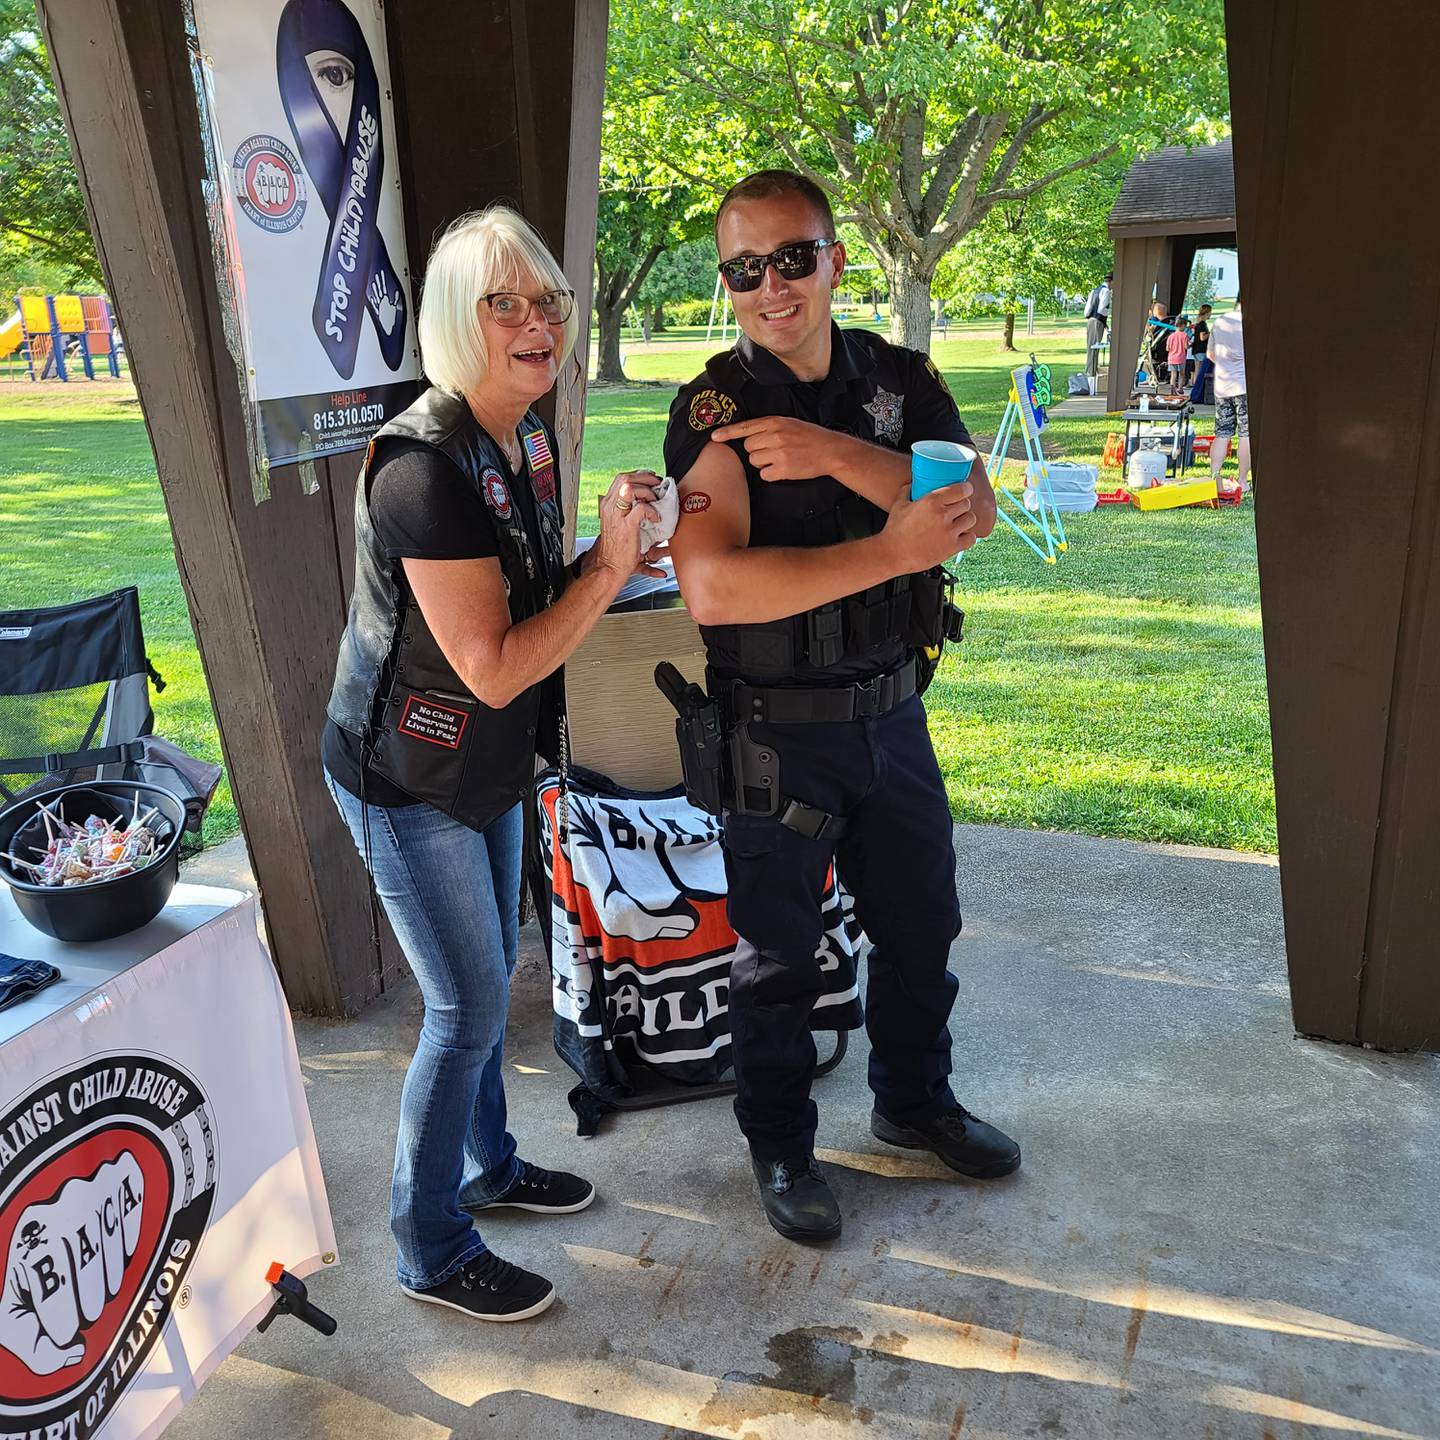 Princeton Police Officer Michael Kernan got a little (temporary) ink from Biker's Against Child Abuse member 'Bones' at National Night Out, the annual event build to foster community/police relations.